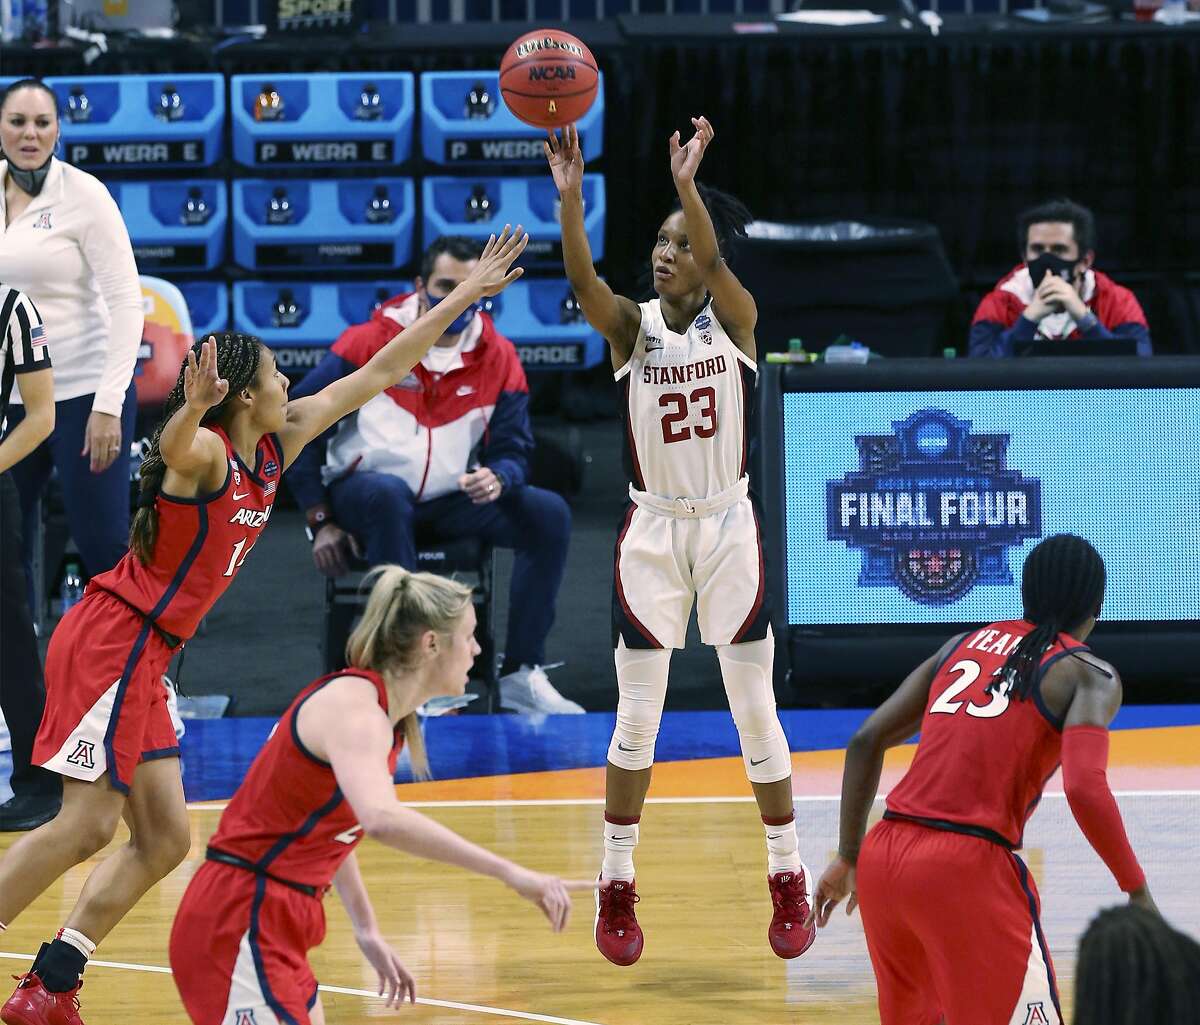 Stanford's Kiana Williams (23) launches a three against Arizona's Sam Thomas (14) during their 2021 NCAA Women's Final Four National Champion basketball game at the Alamodome on Sunday, Apr. 4, 2021.